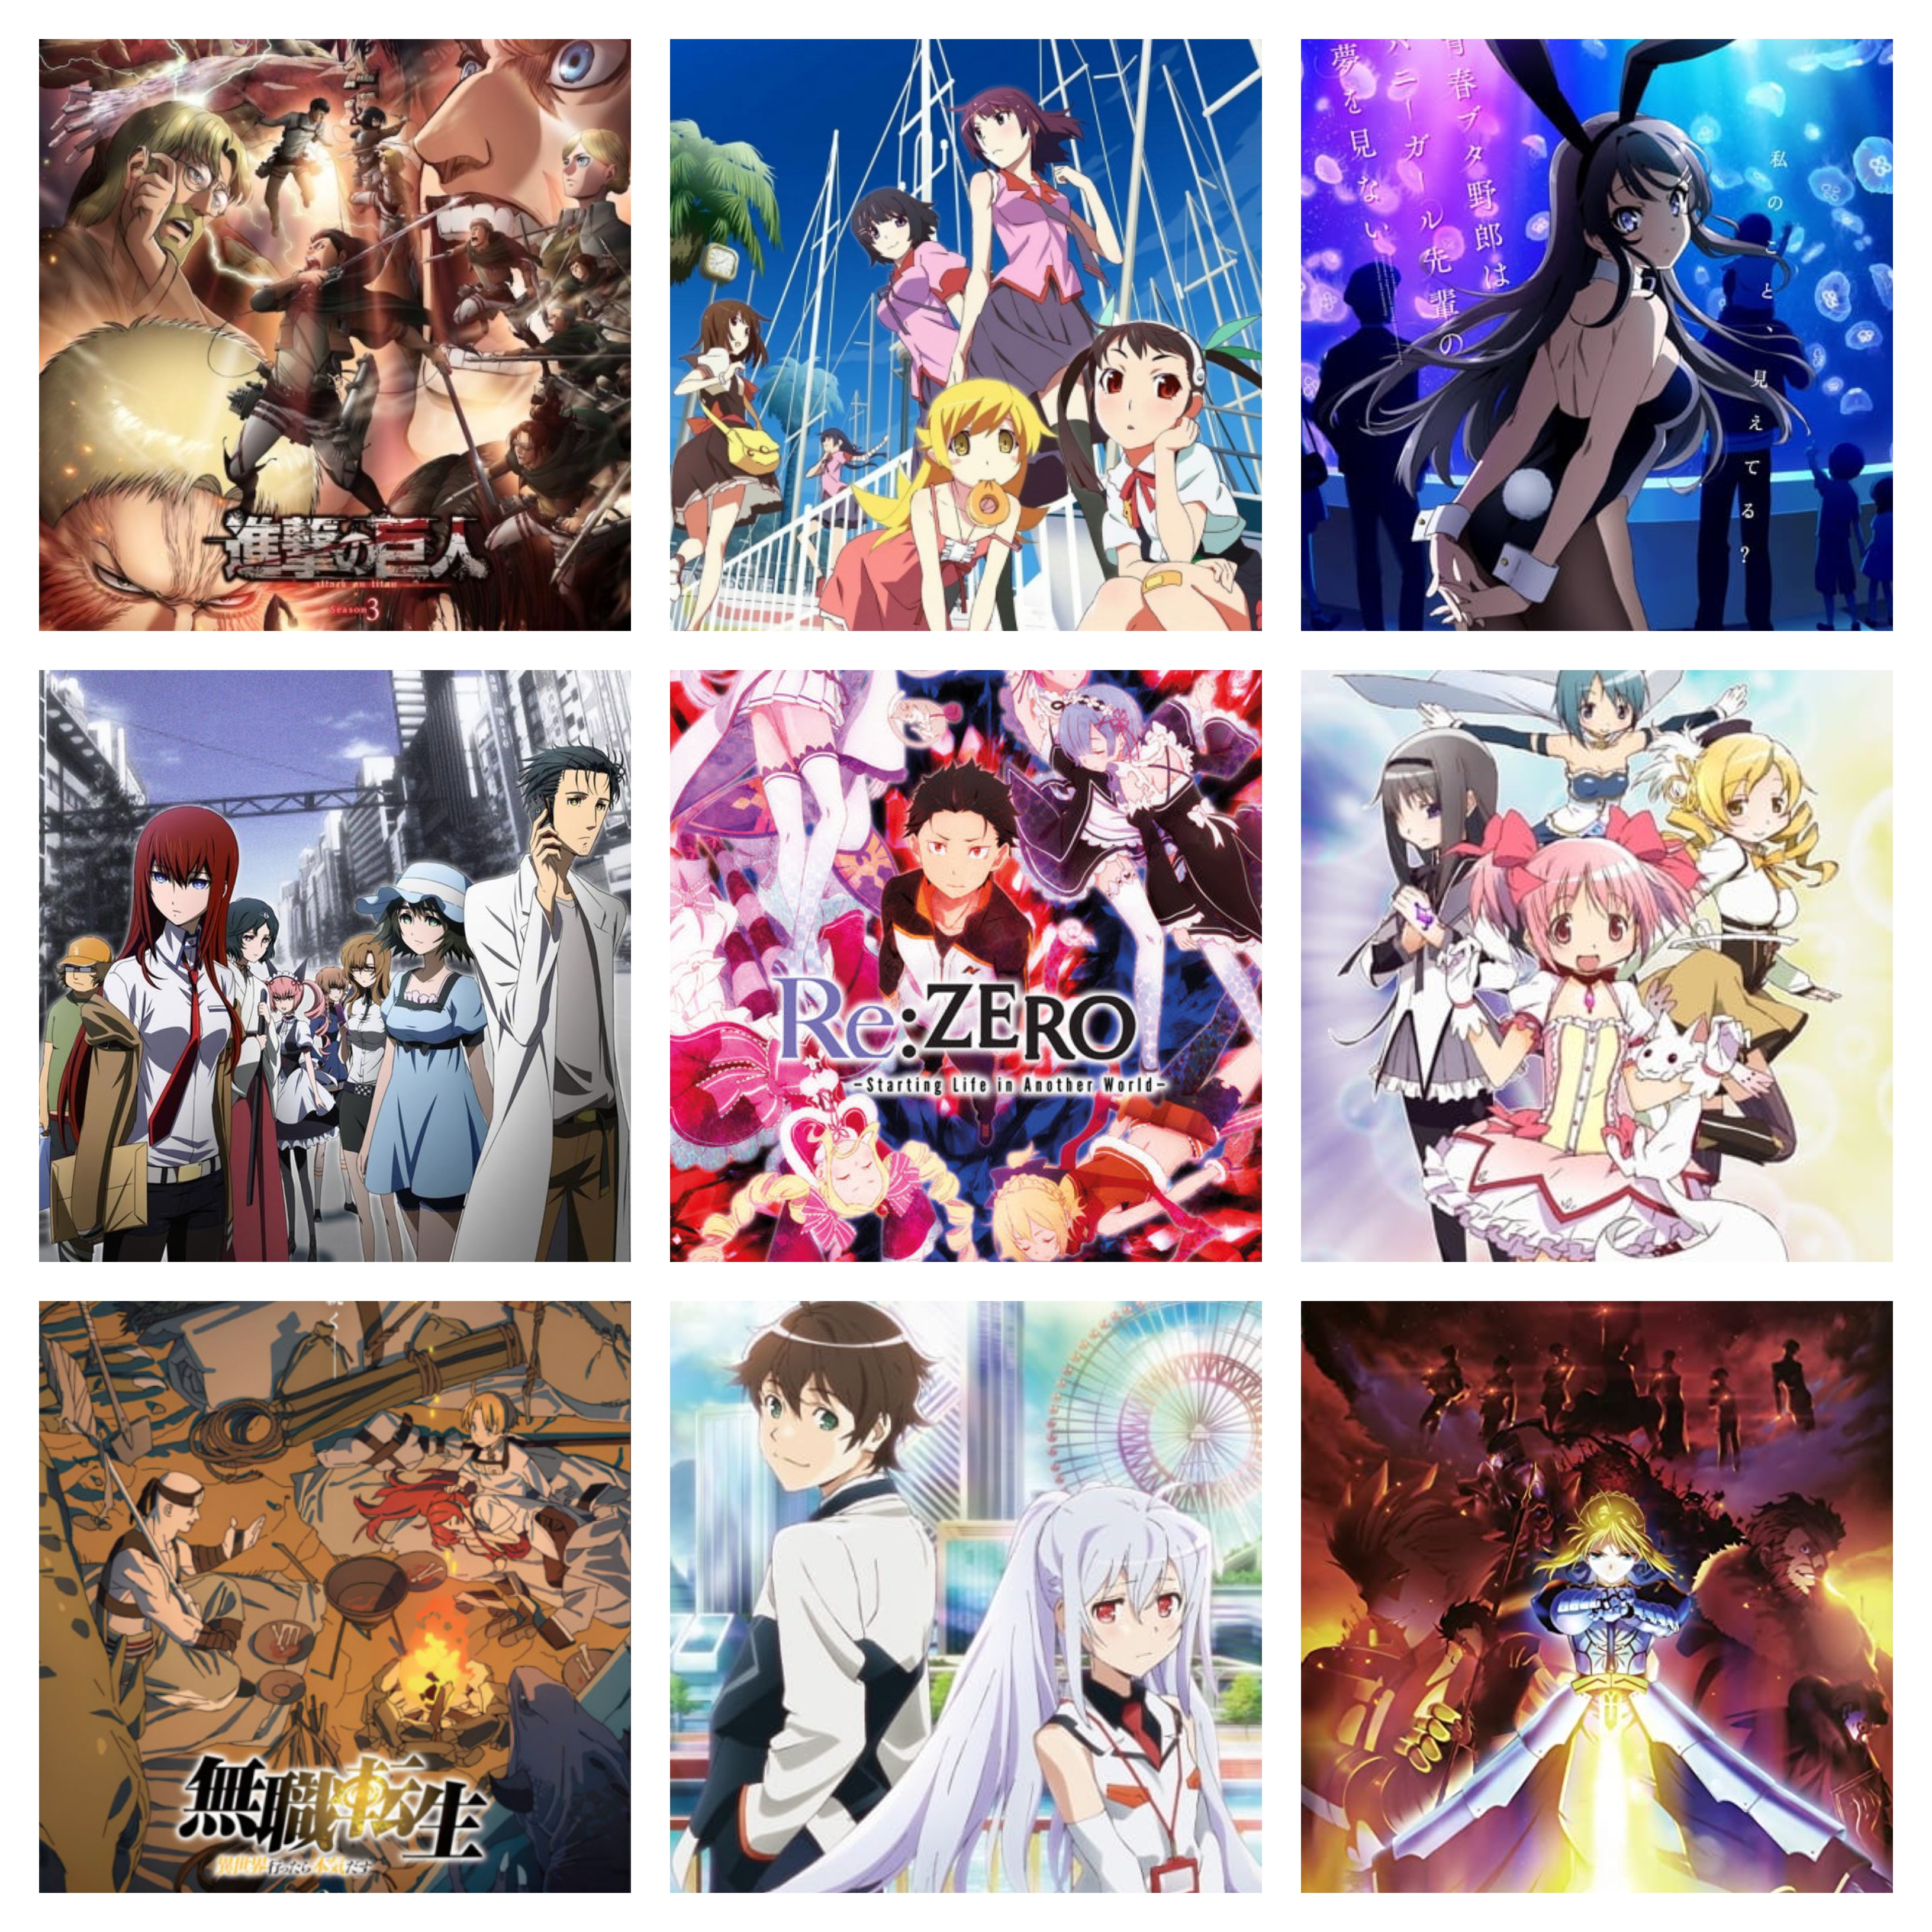 Throw my hat in the ringmy 3x3. Love to hear thoughts on these :  r/MyAnimeList